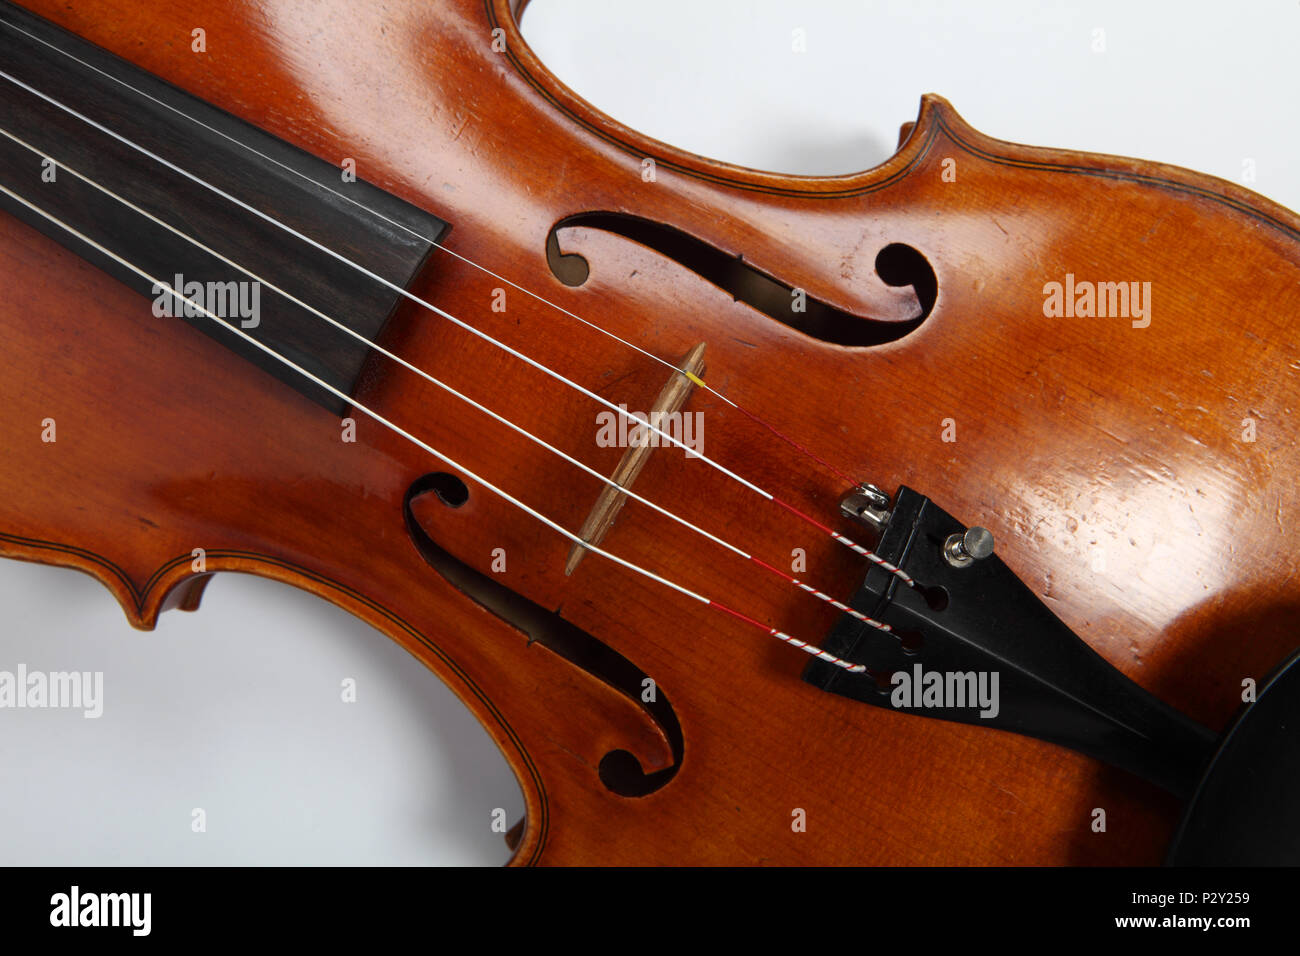 generic, close up of violins and parts of violins - f holes Stock Photo